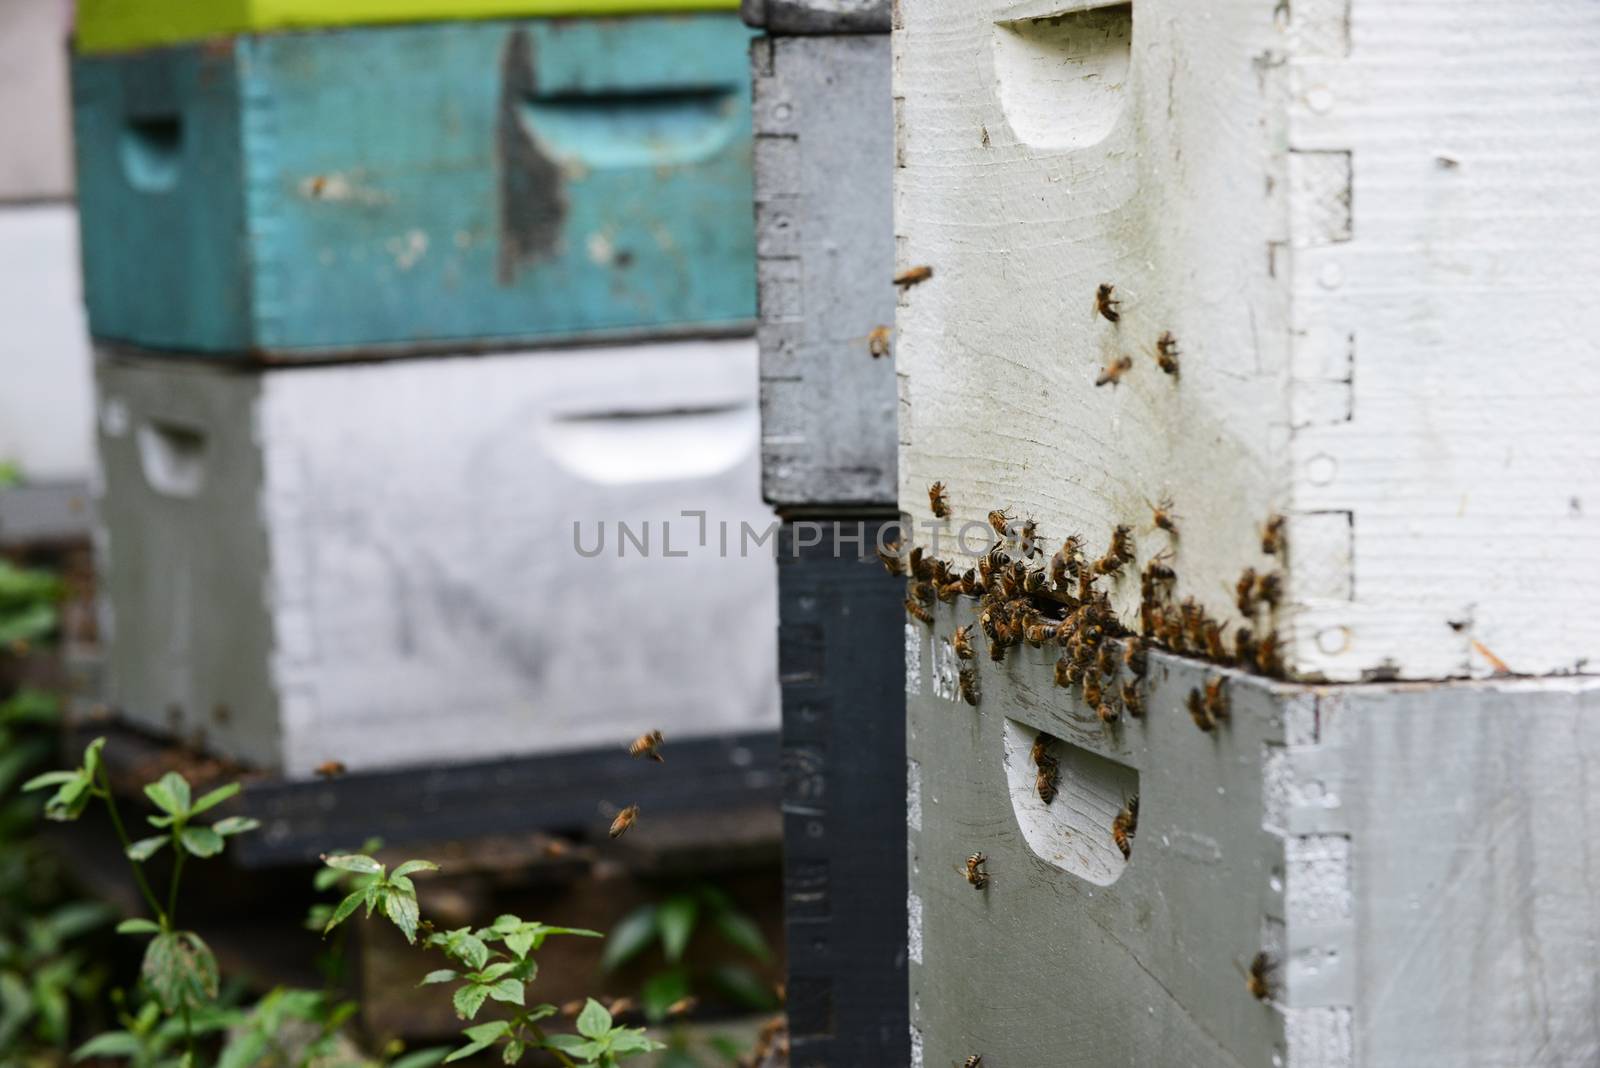 bees flying around hives at aviary